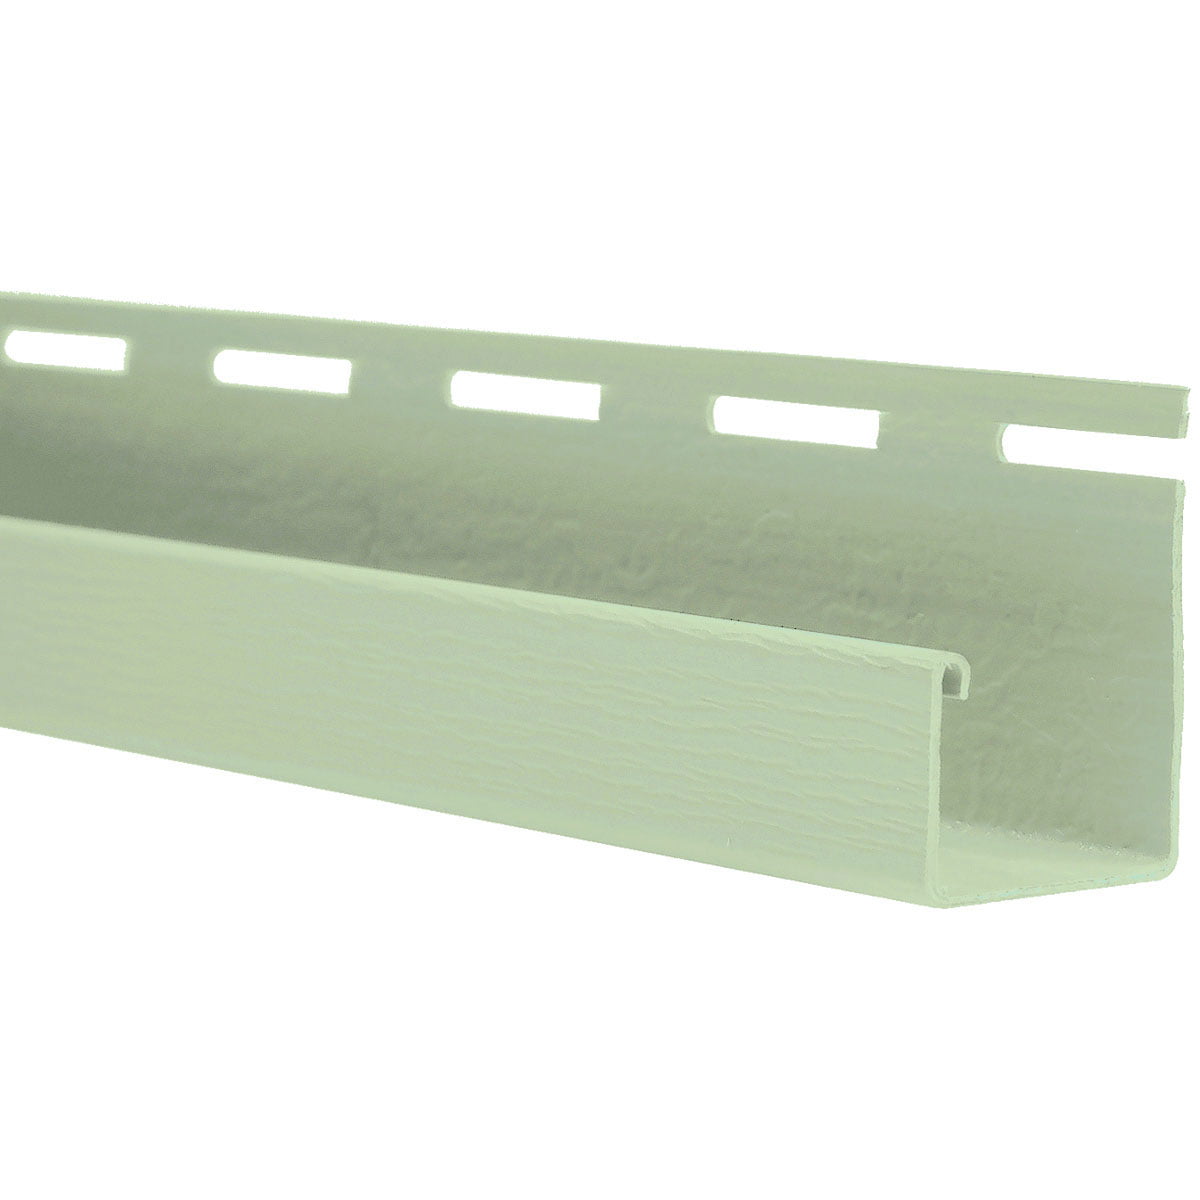 The Foundry 3/4W x 90L J-Channel For use with all Vinyl Siding systems  excluding Staggered Shakes (20 Strips/Ctn. = 150 Ln. Feet), 042 - Almond 